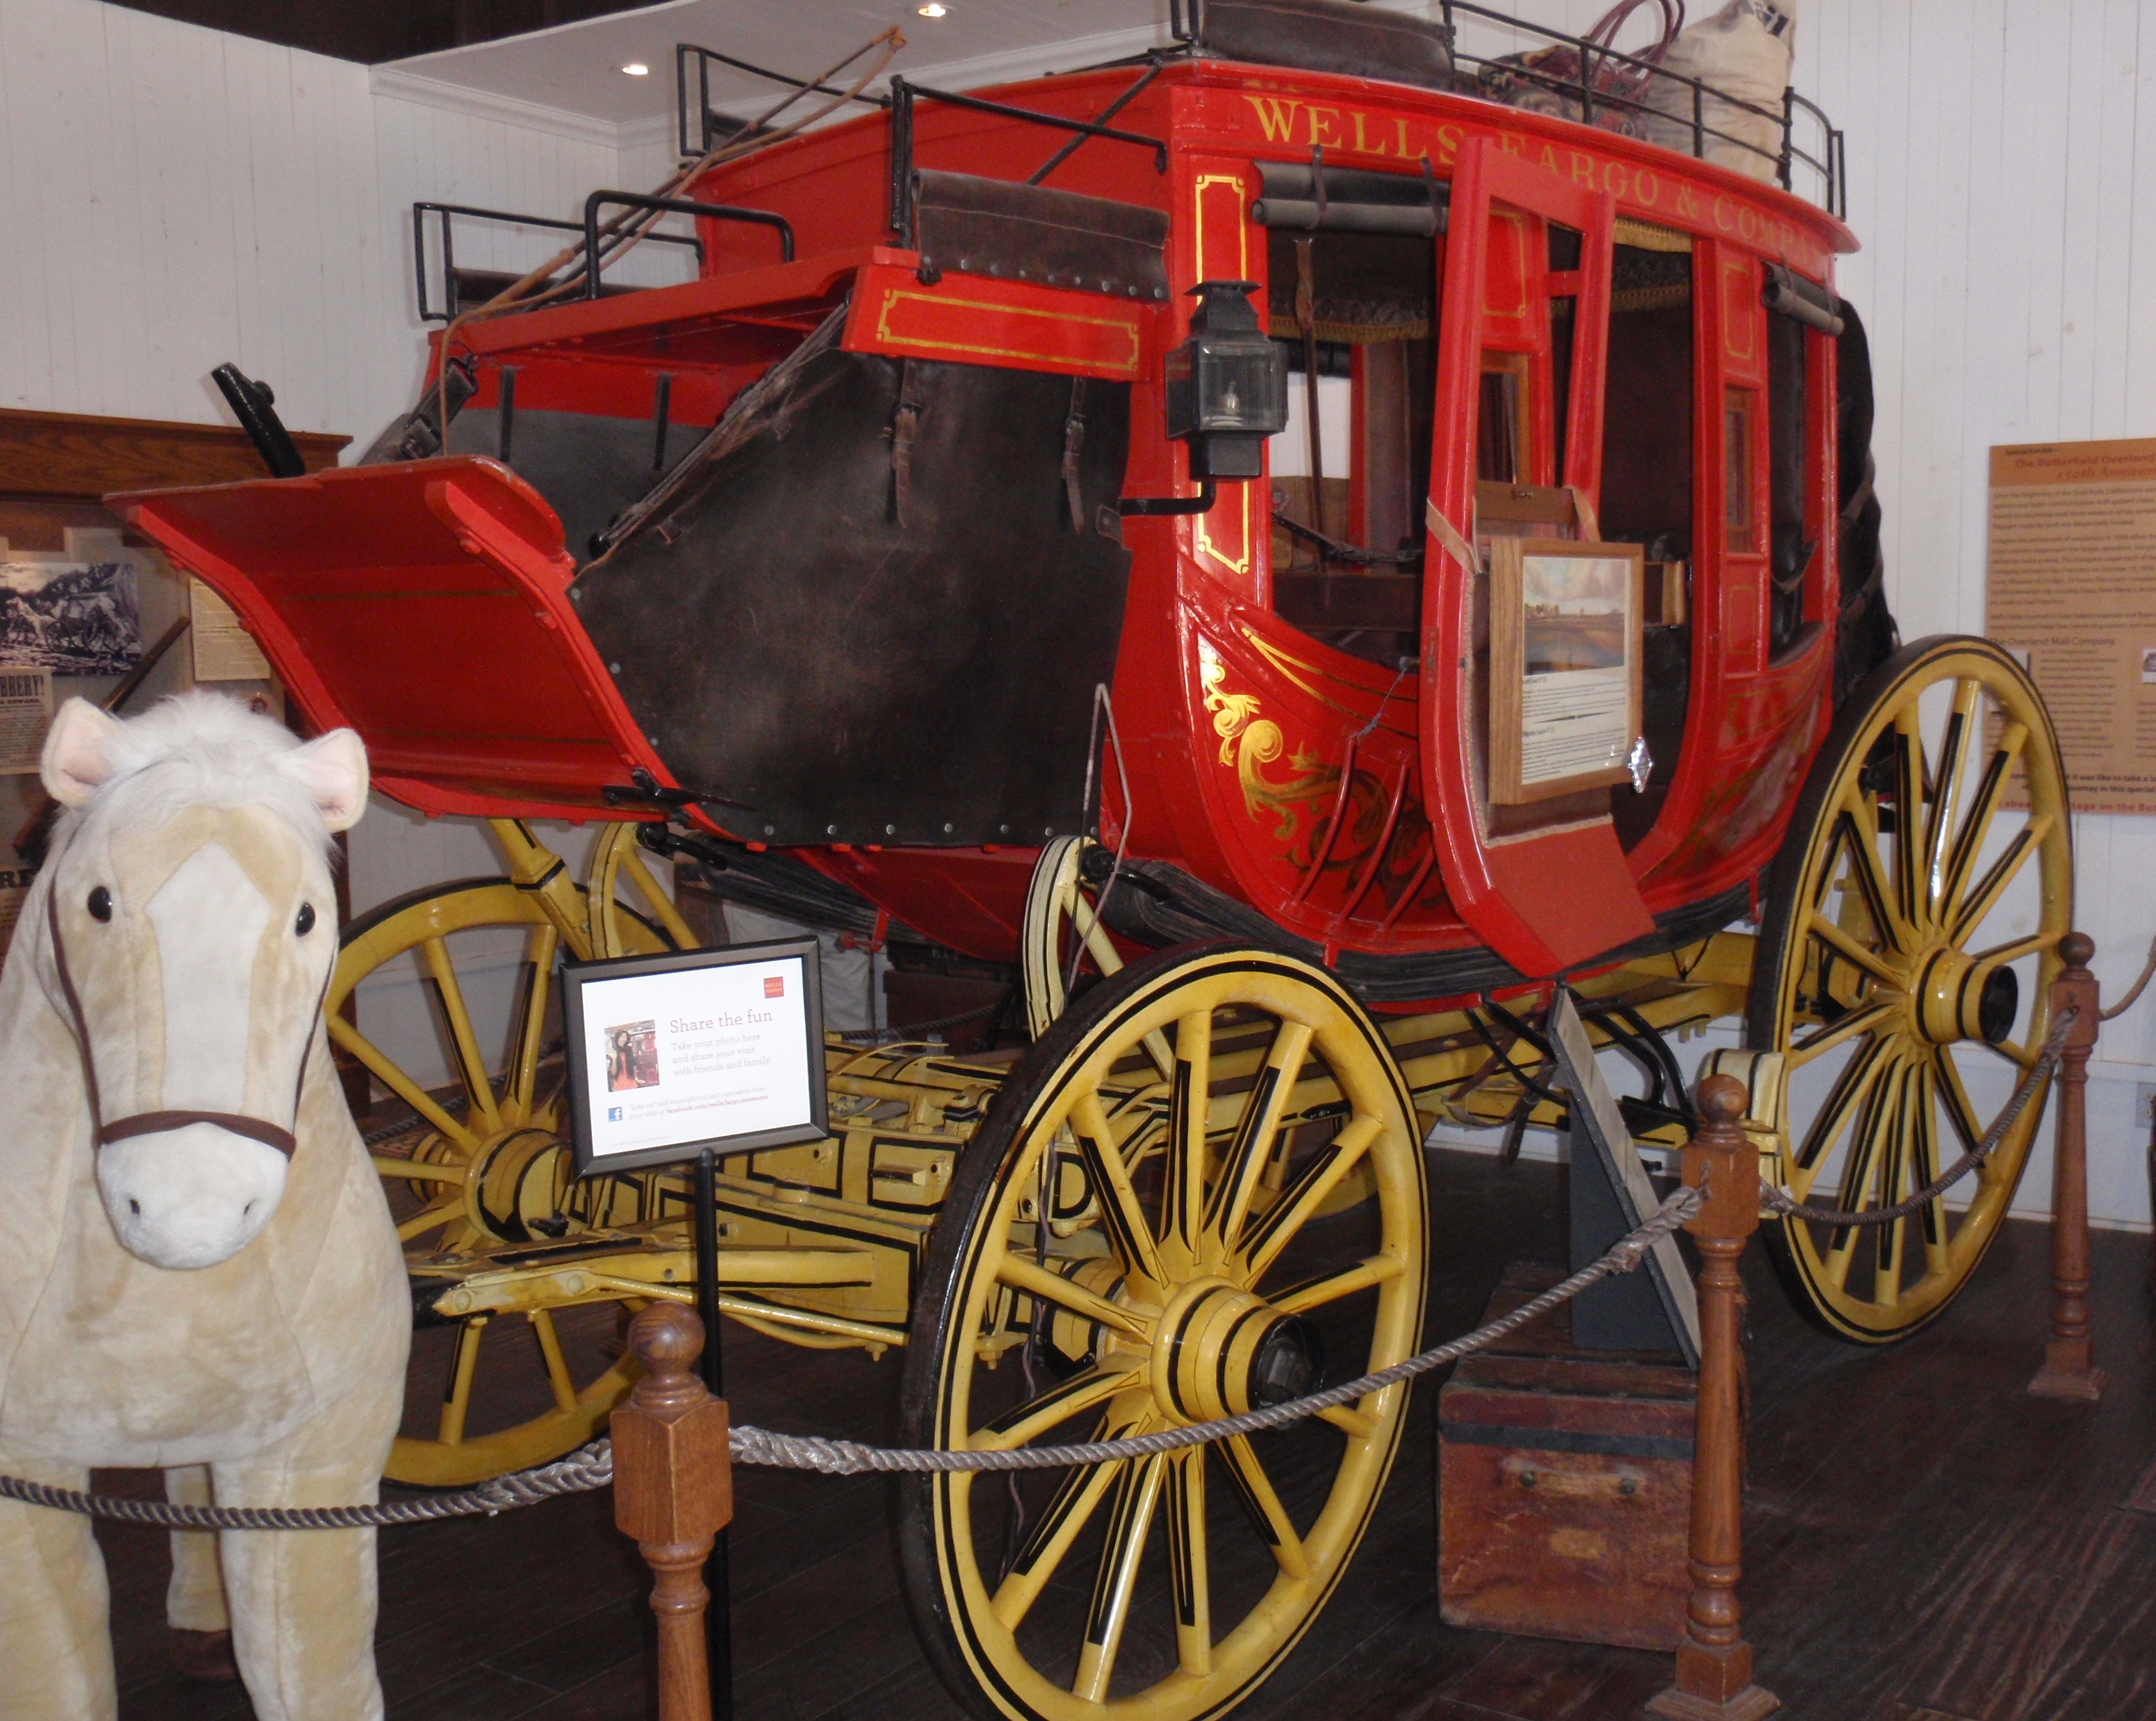 Wells Fargo museum in San Diego's Old Town State Park. Photo by James Ulvog.